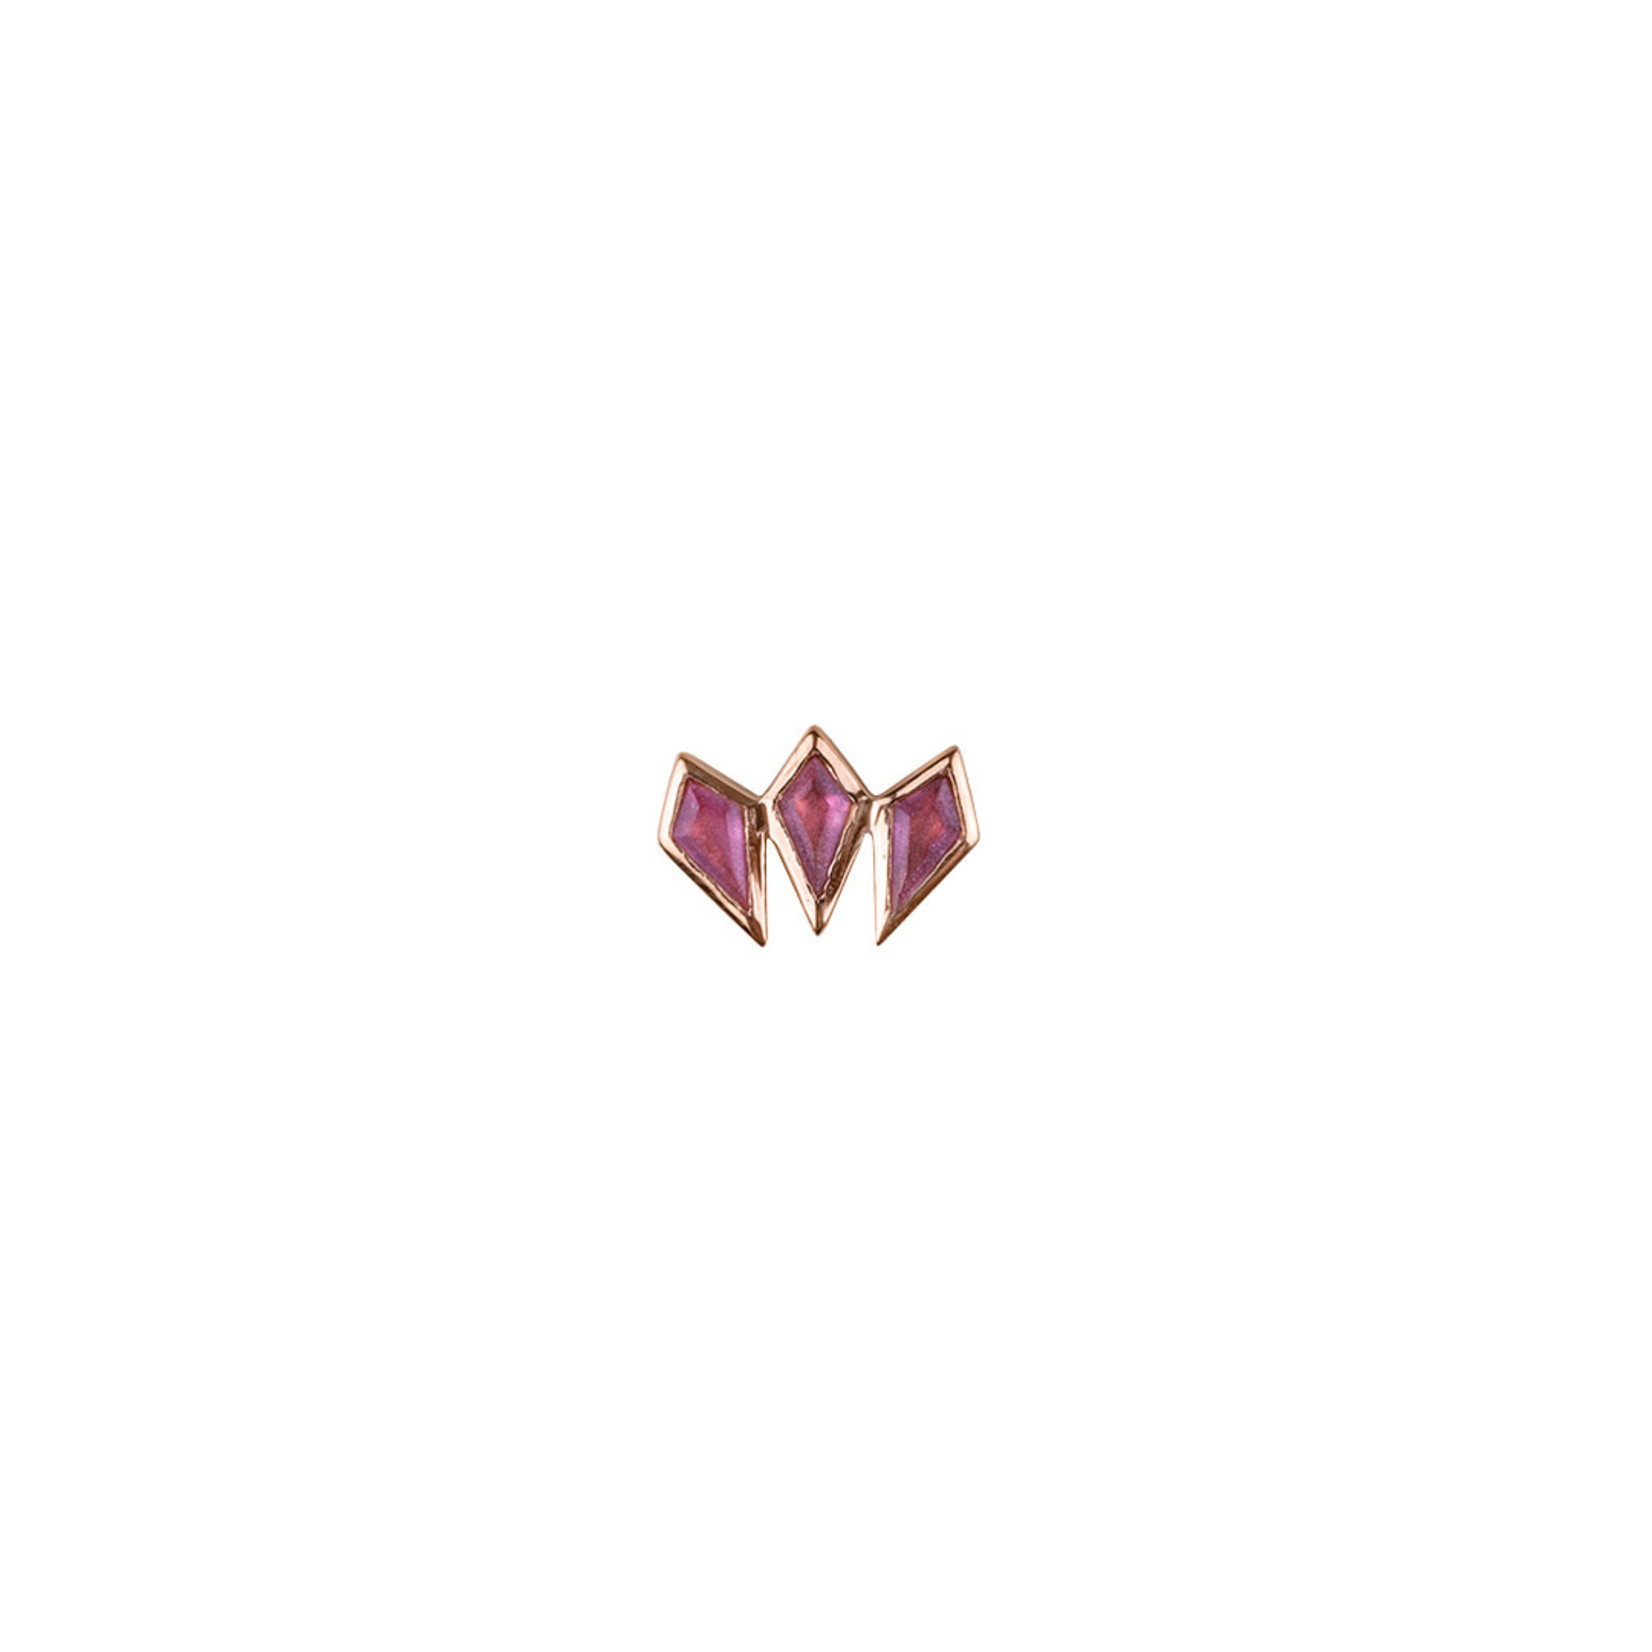 BVLA BVLA rose gold "Sweetest Gift" threaded end with 3x 4x2 sandblasted pink tourmaline